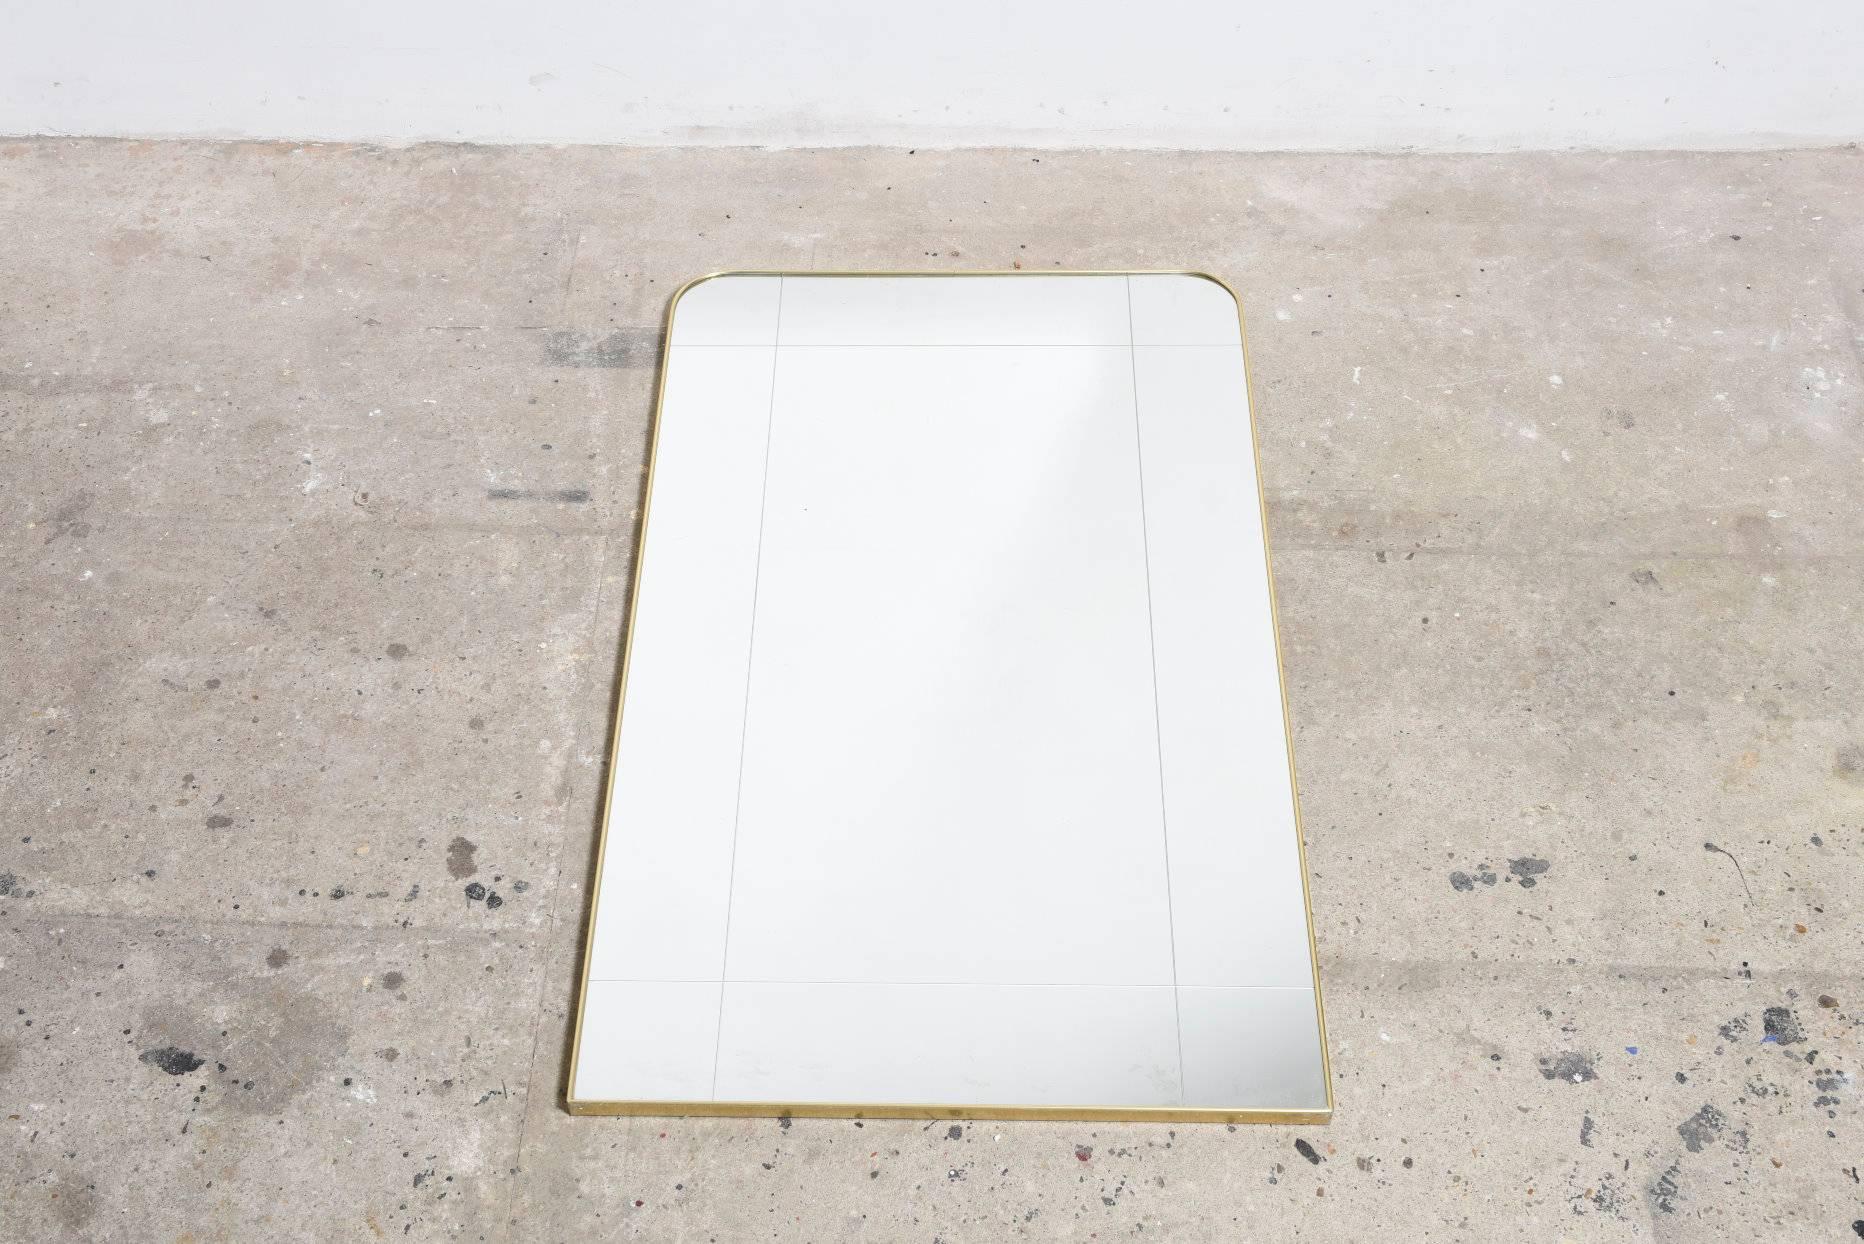 Large 1960s Italian brass frame mirror attributed to Gio Ponti.

The design of the mirror by chiselled creates a pattern of beautiful lines giving the mirror a particularly stylish accent.

With its pure timeless shape and iconic expression, the